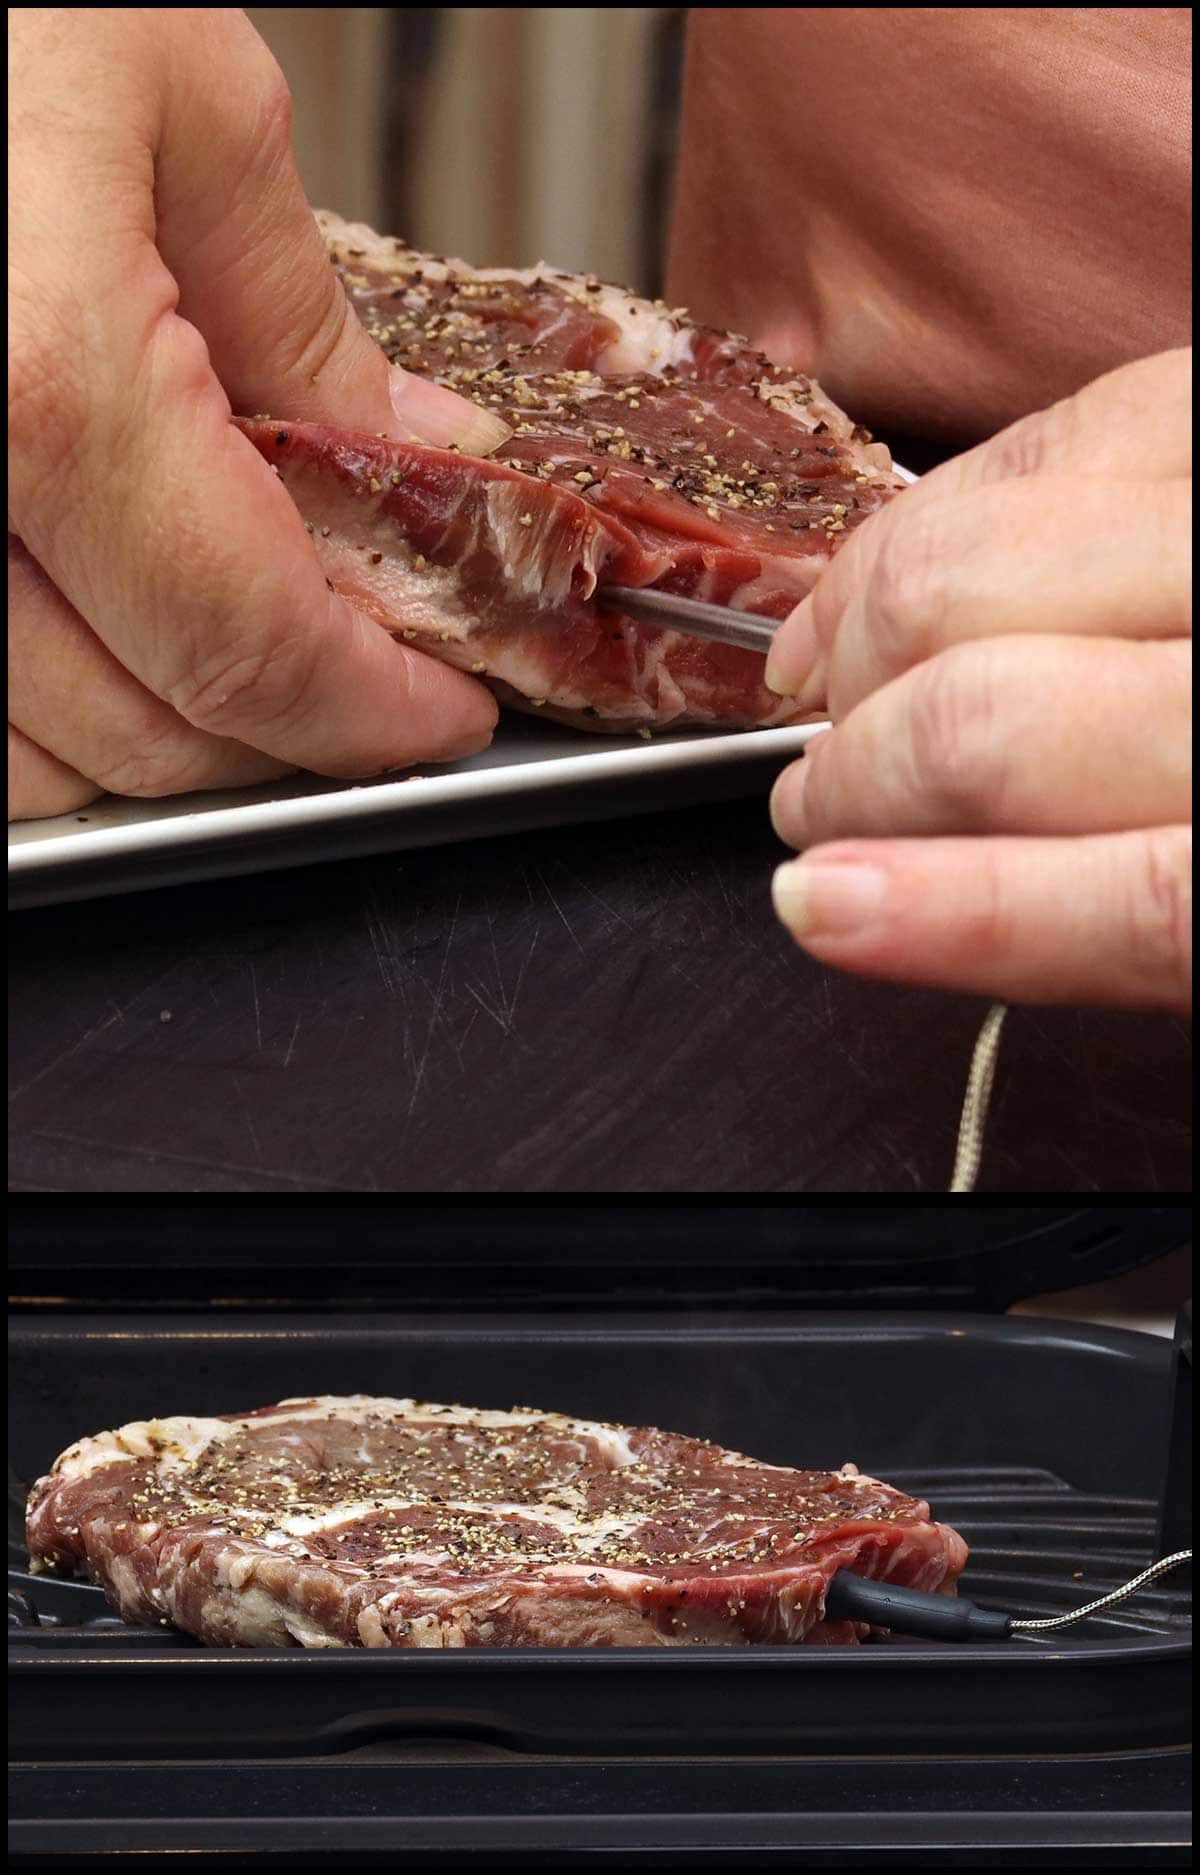 inserting the probe into a ribeye to measure internal temperature